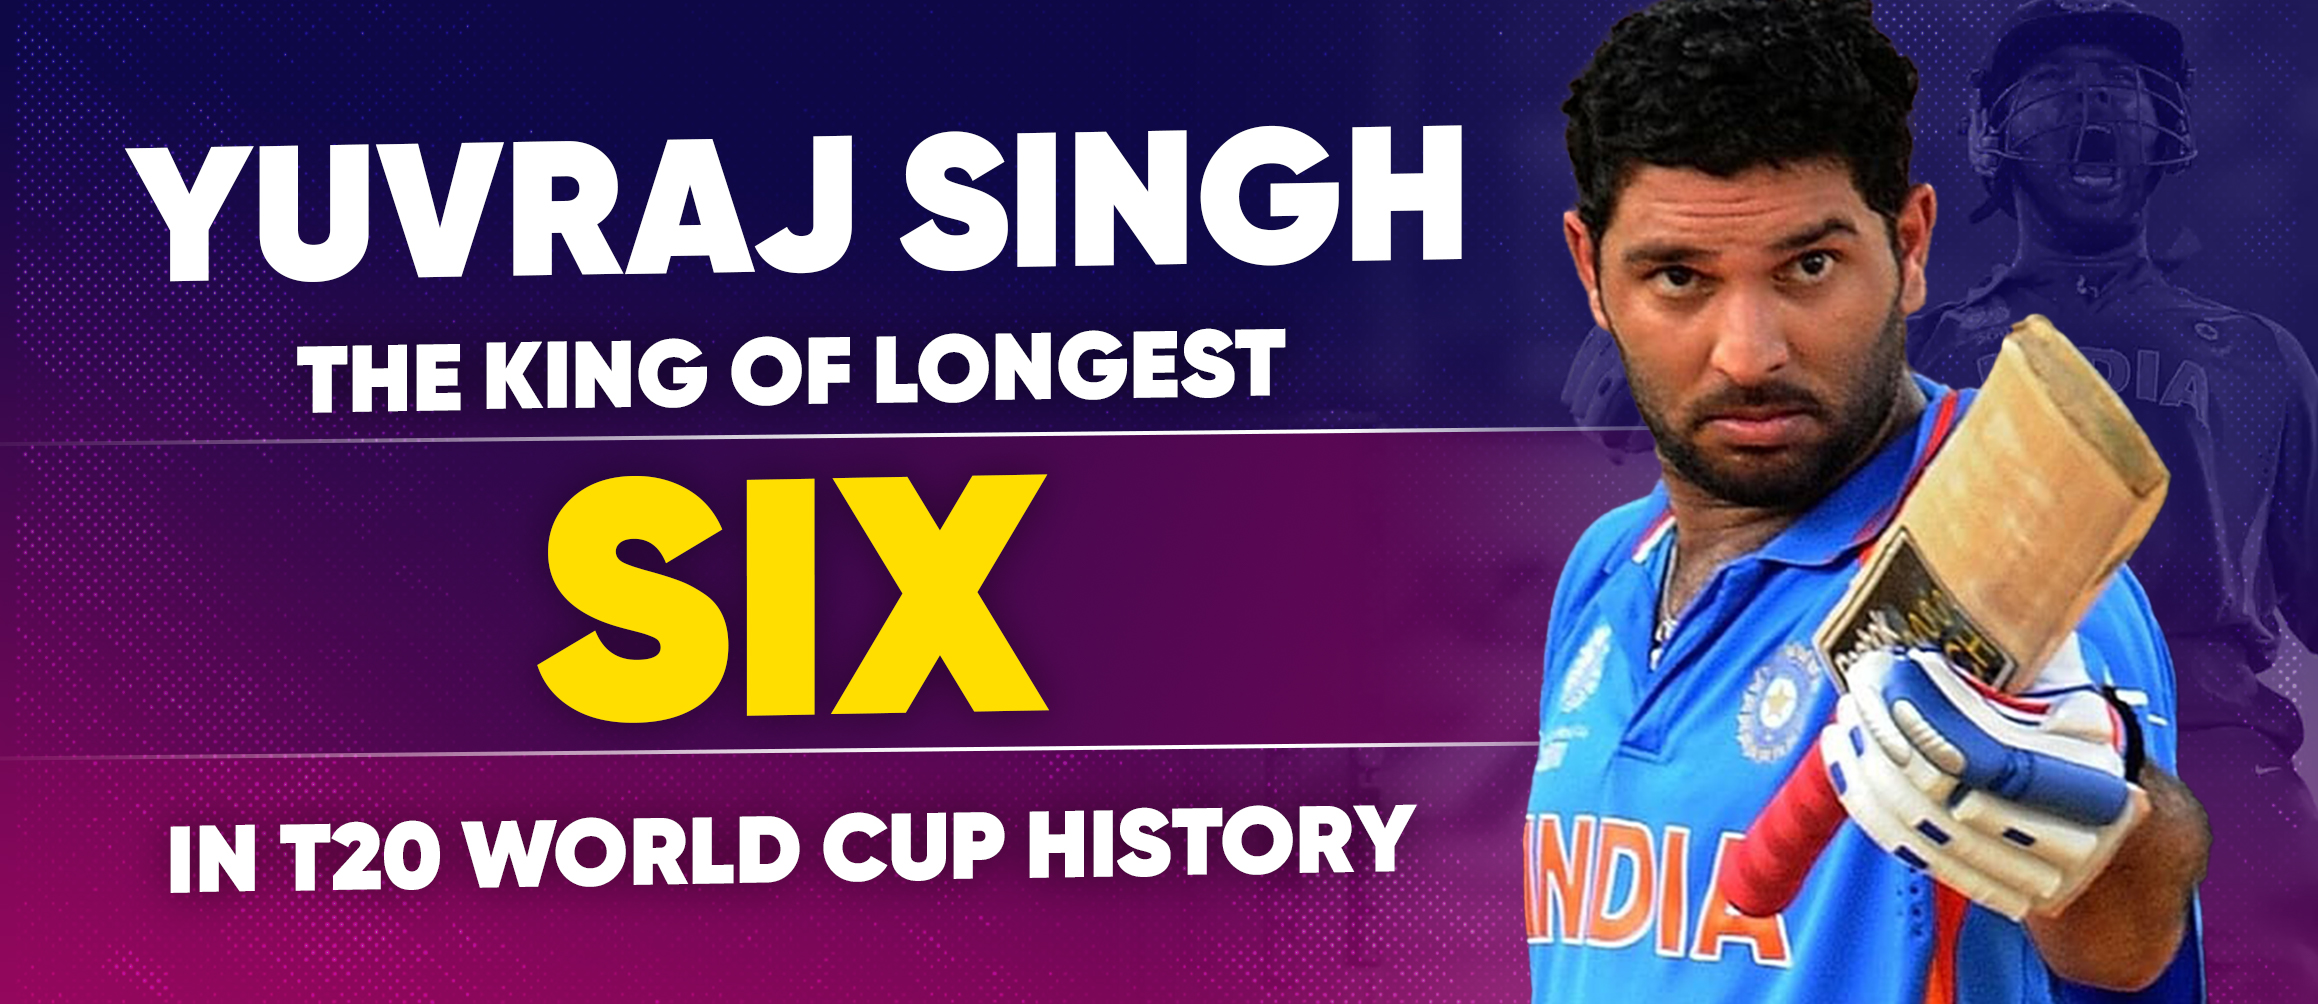 Yuvraj Singh – The King of Longest Six in T20 World Cup History